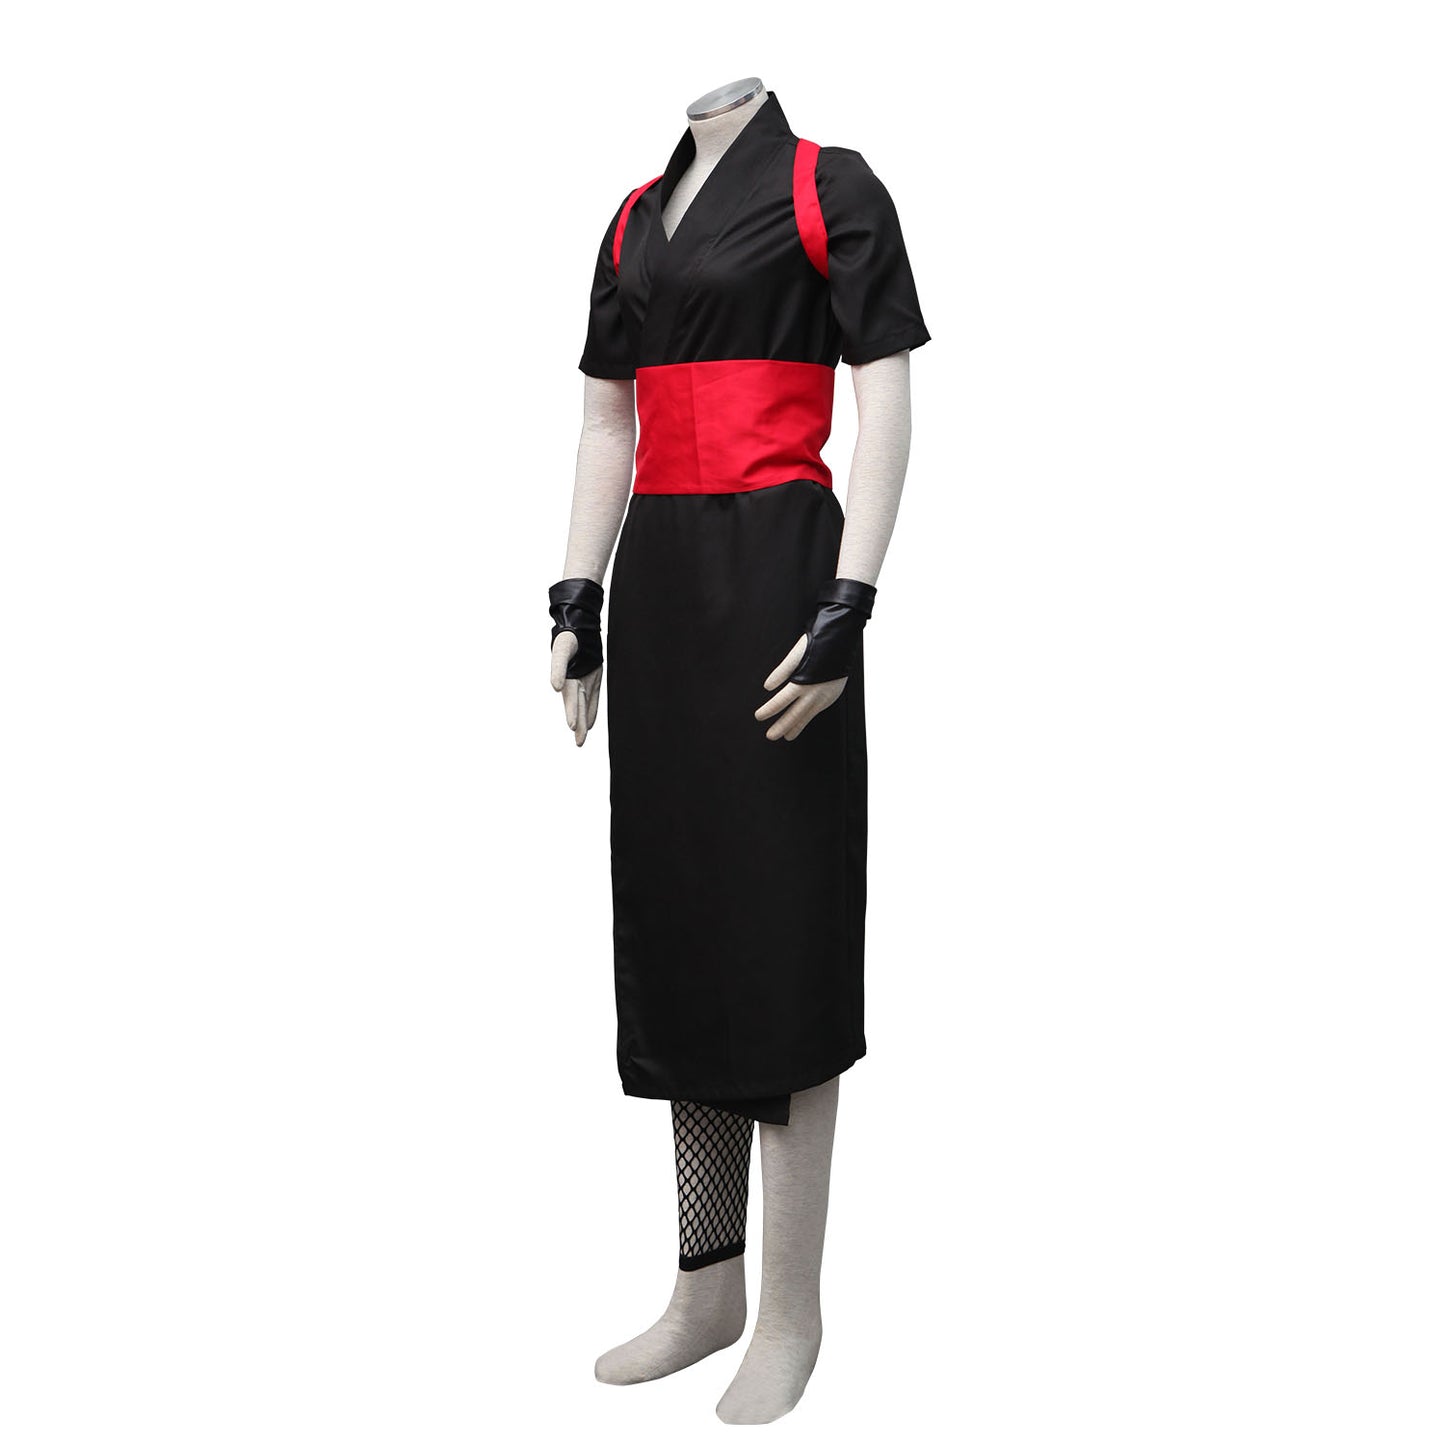 Naruto Shippuden Costume Temari Cosplay Black full Outfit for Women and Kids